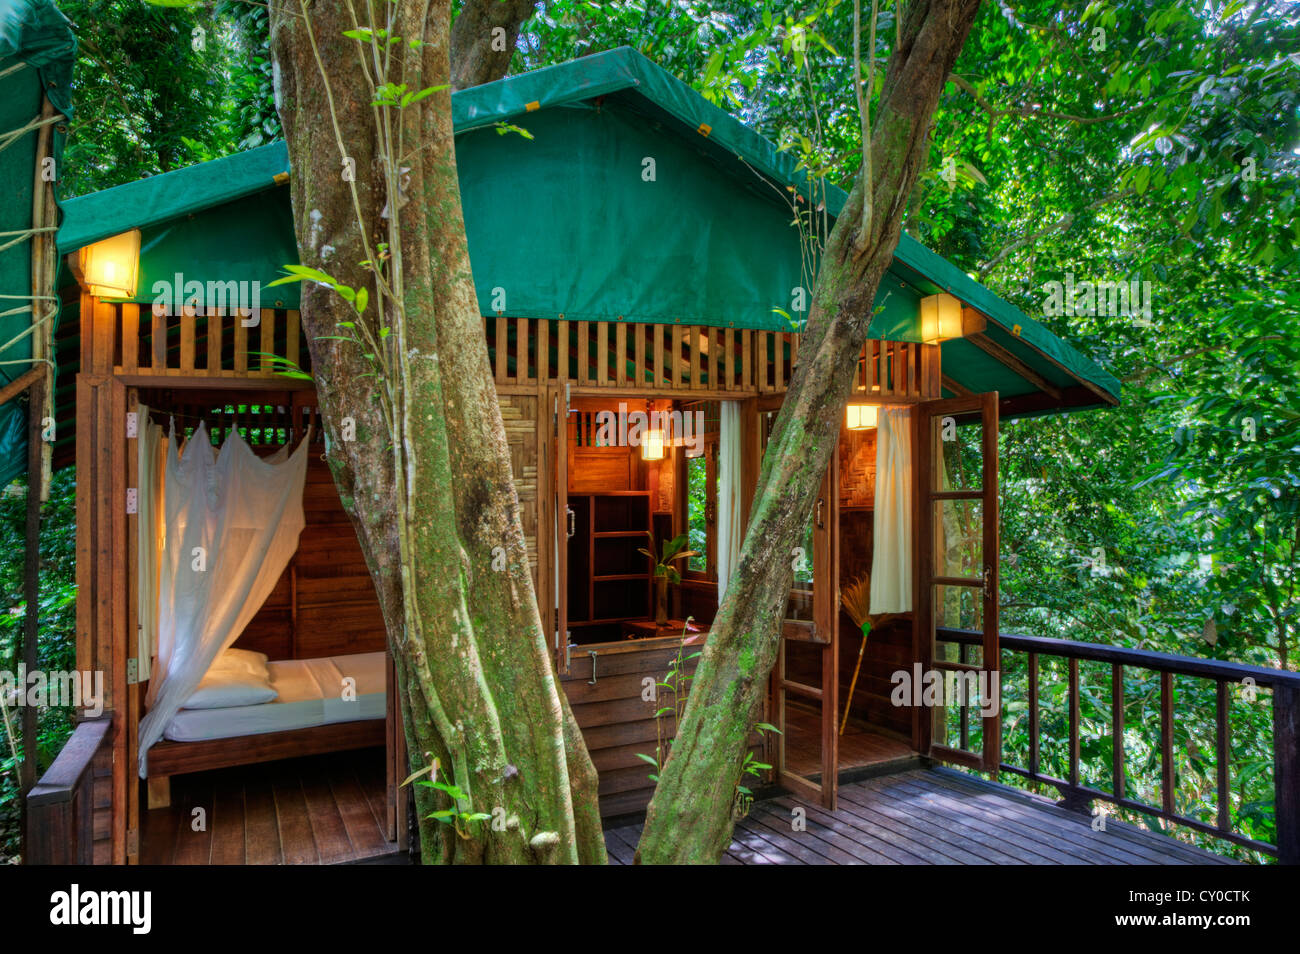 TREE HOUSES are the specialty of OUR JUNGLE HOUSE a lodge near ...